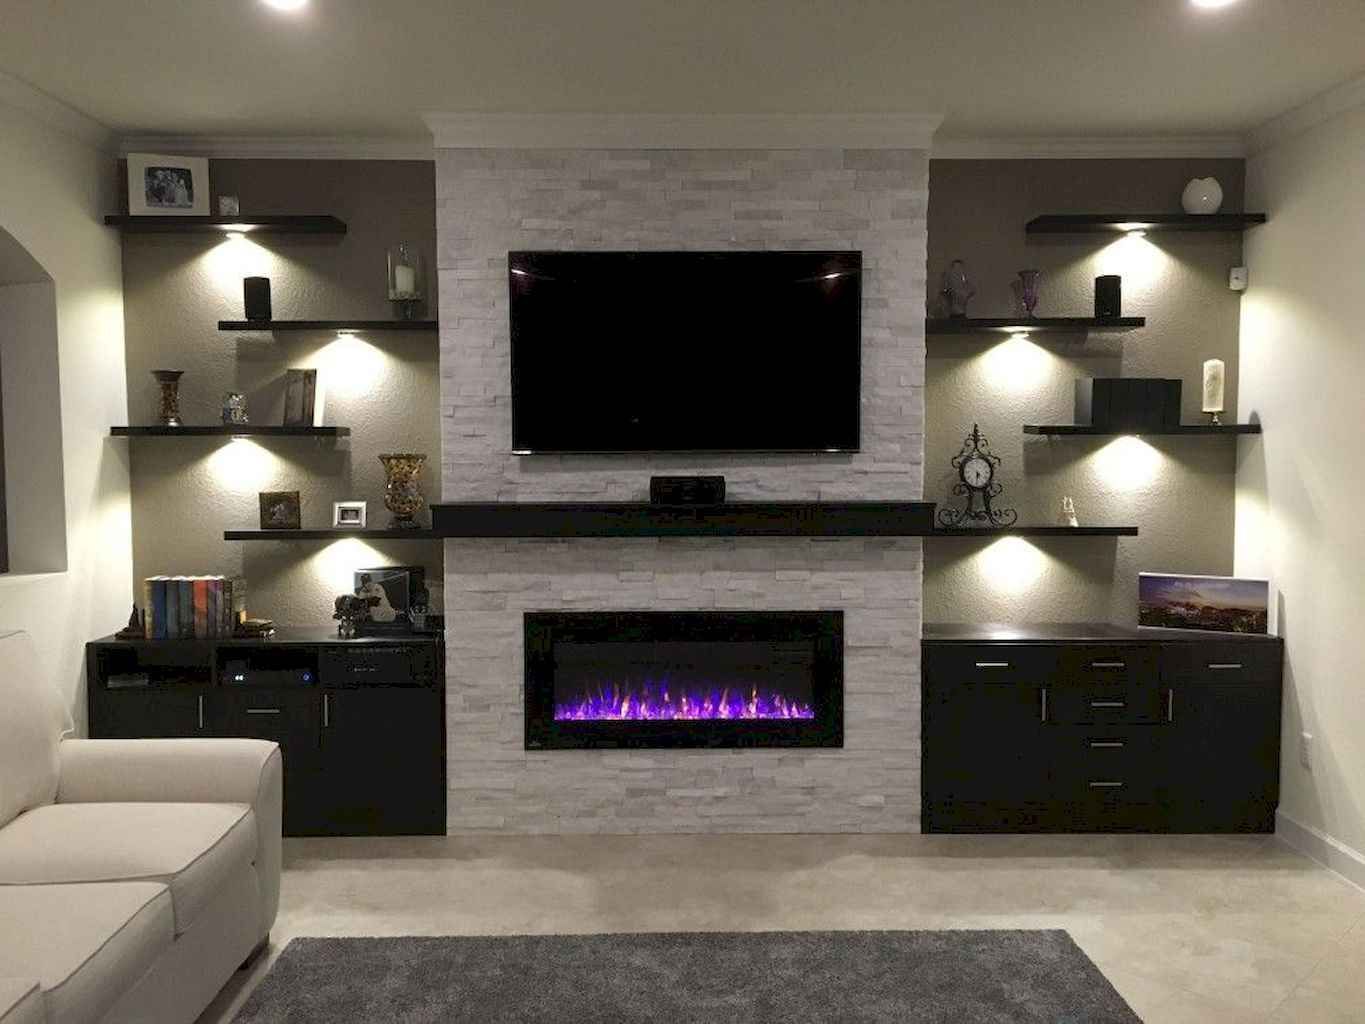 Where to Put Tv In Living Room with Fireplace New 50 Diy Floating Shelves for Living Room Decorating